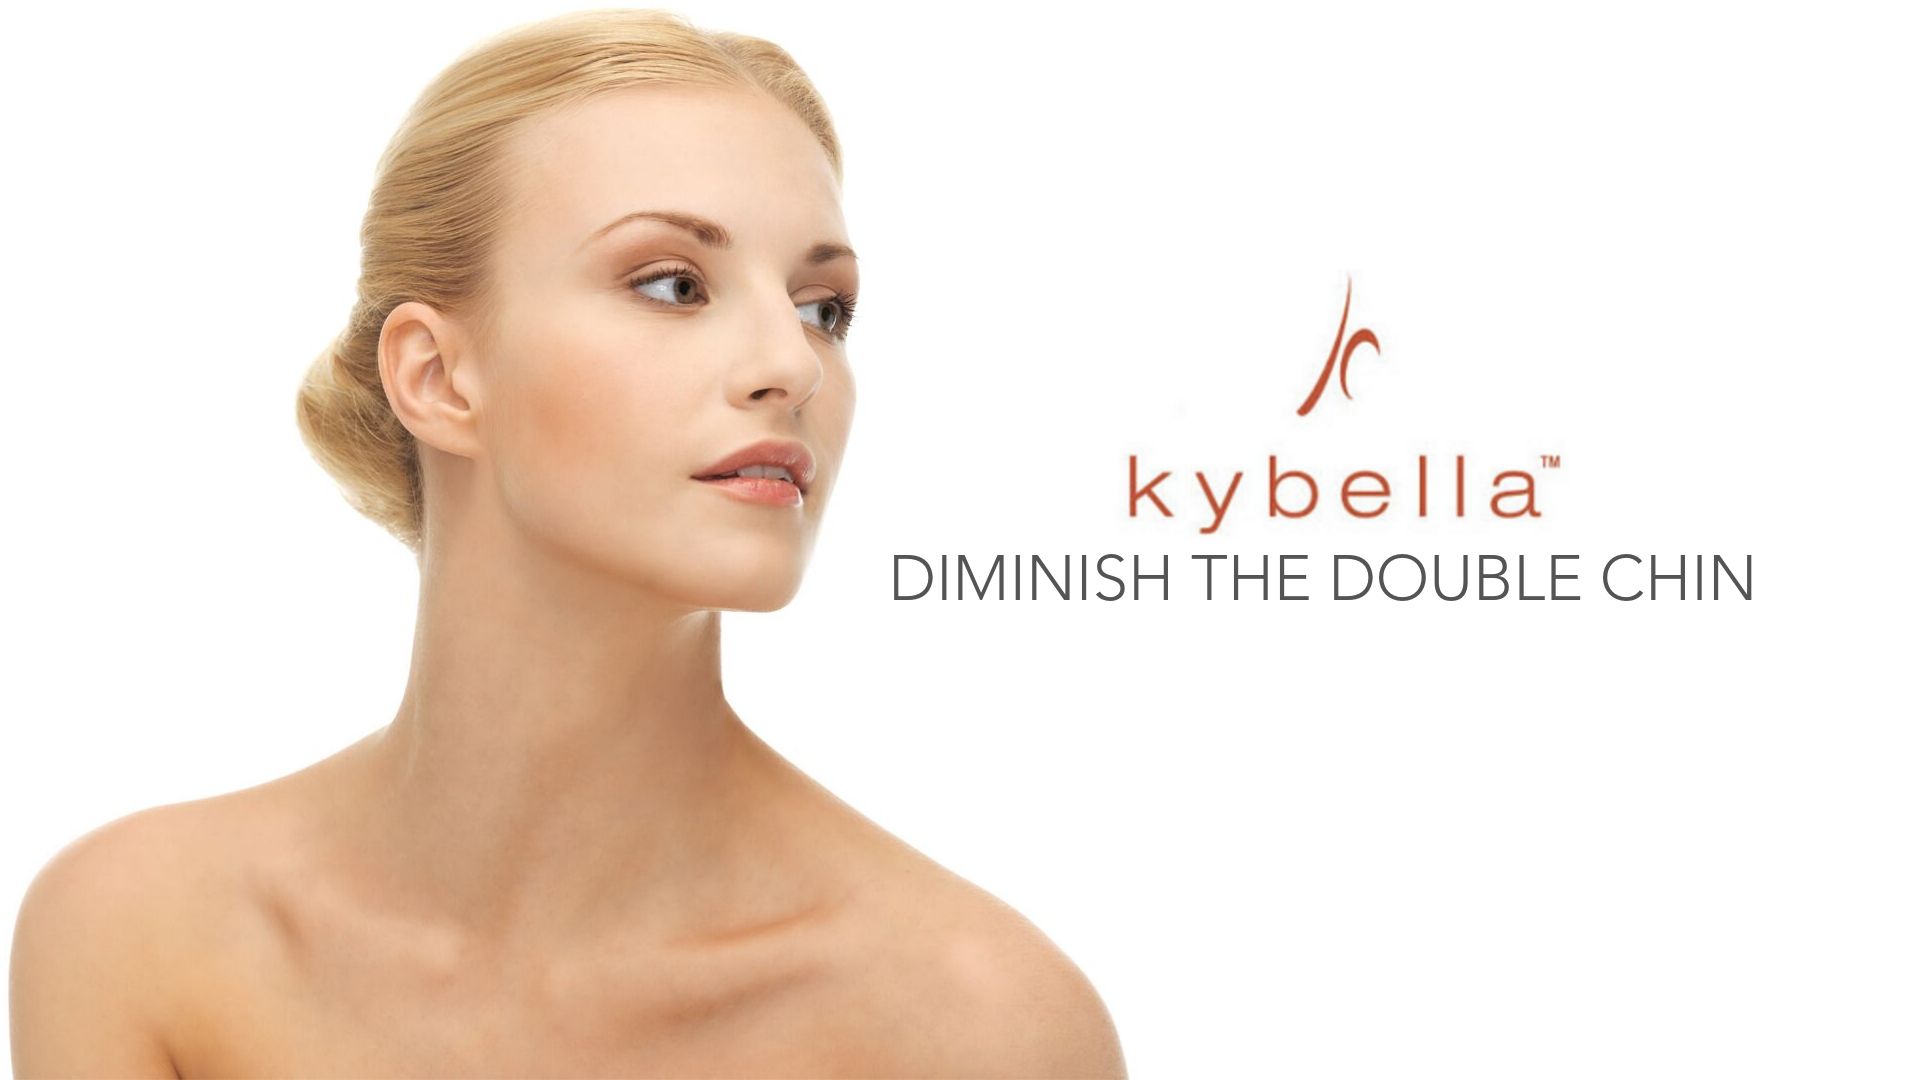 Woman with a defined chin after Kybella treatment at Shore Medical Aesthetics.